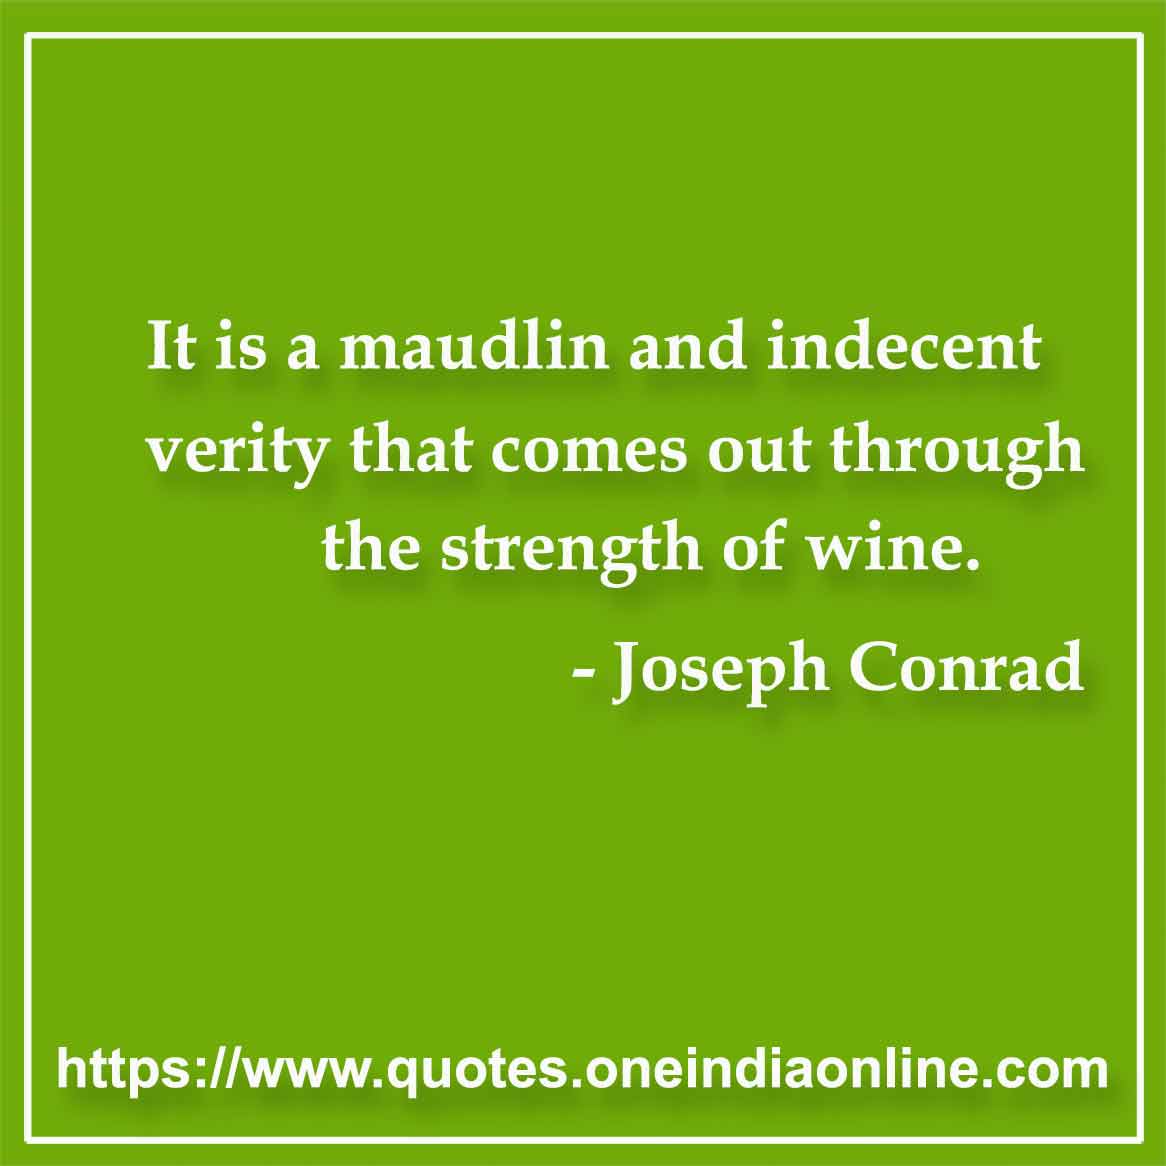 It is a maudlin and indecent verity that comes out through the strength of wine.

- Wine quotes by Joseph Conrad